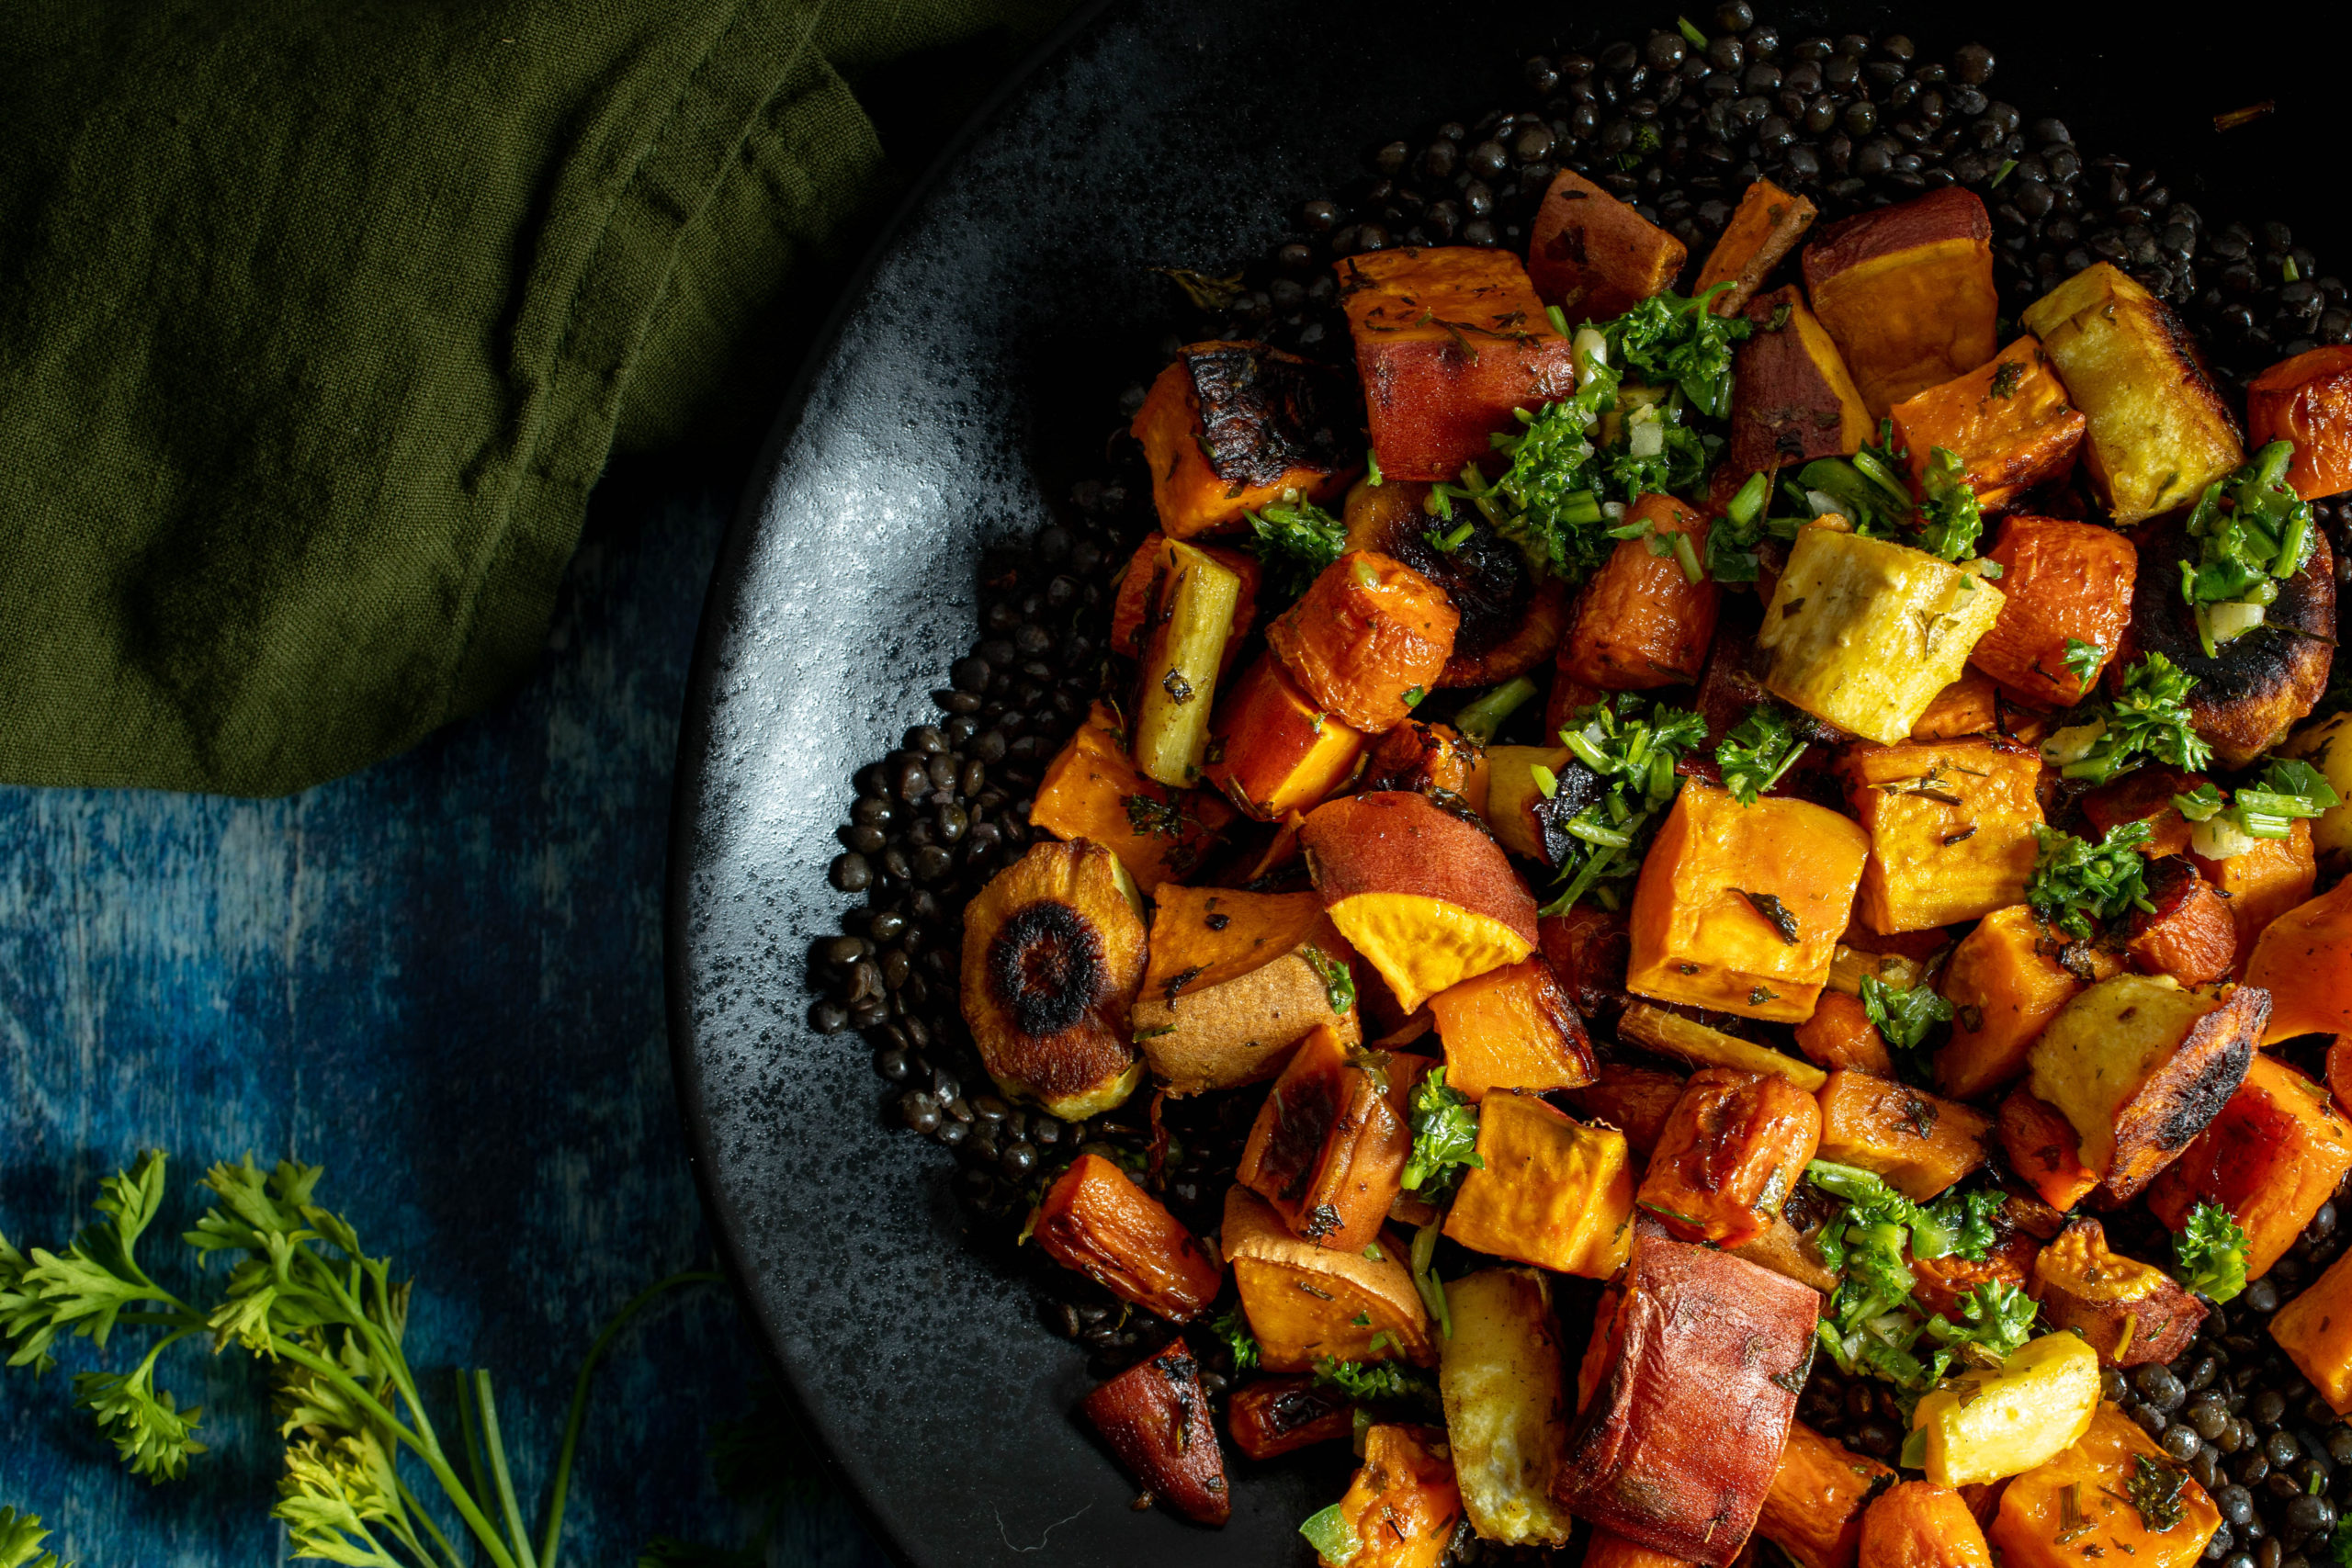 Roasted Root Vegetable and Black Lentil Salad with Chimichurri Sauce